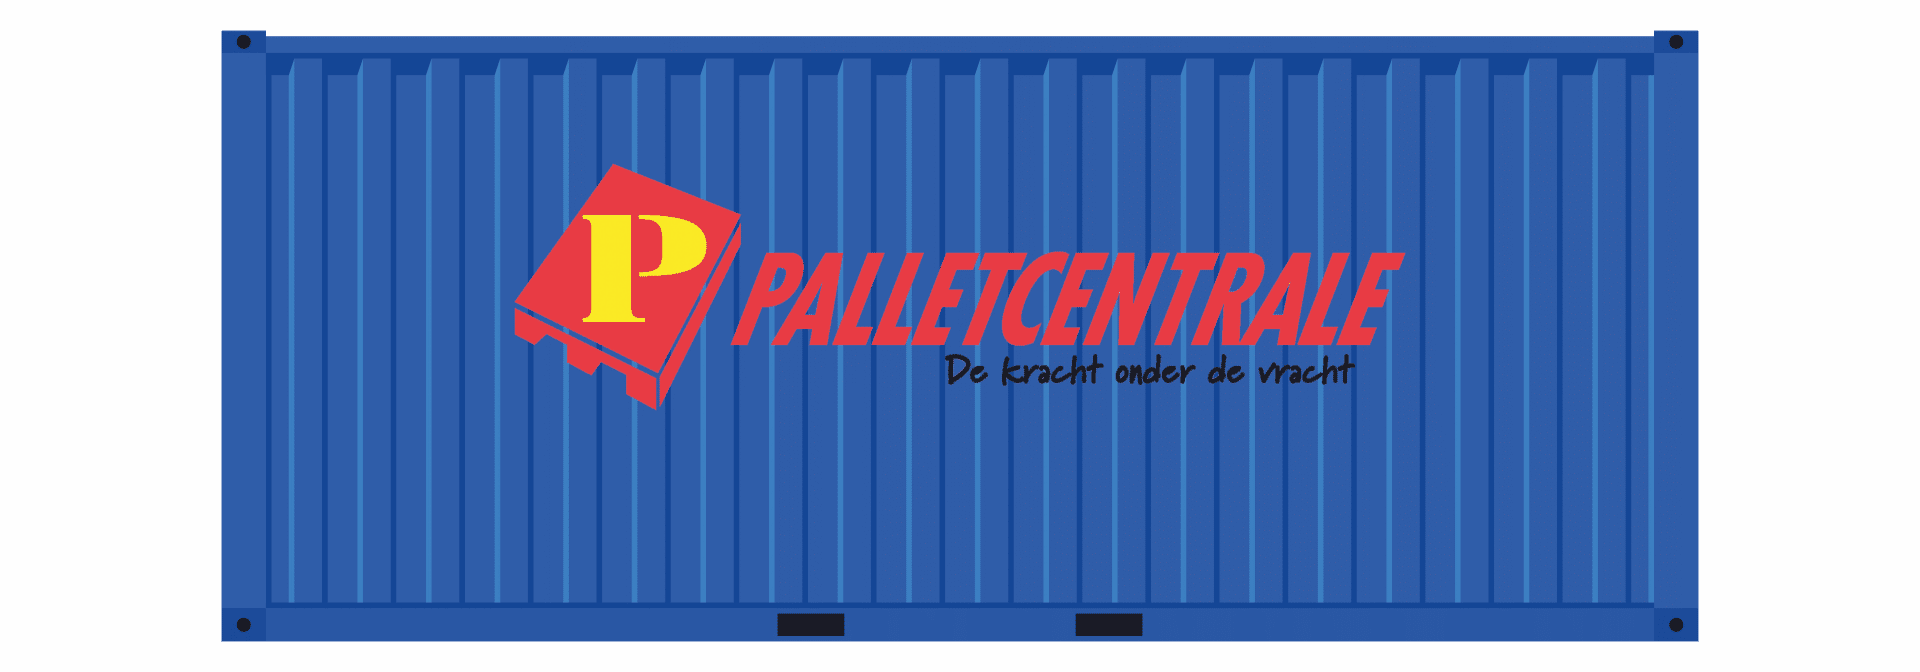 container logo palletcentrale